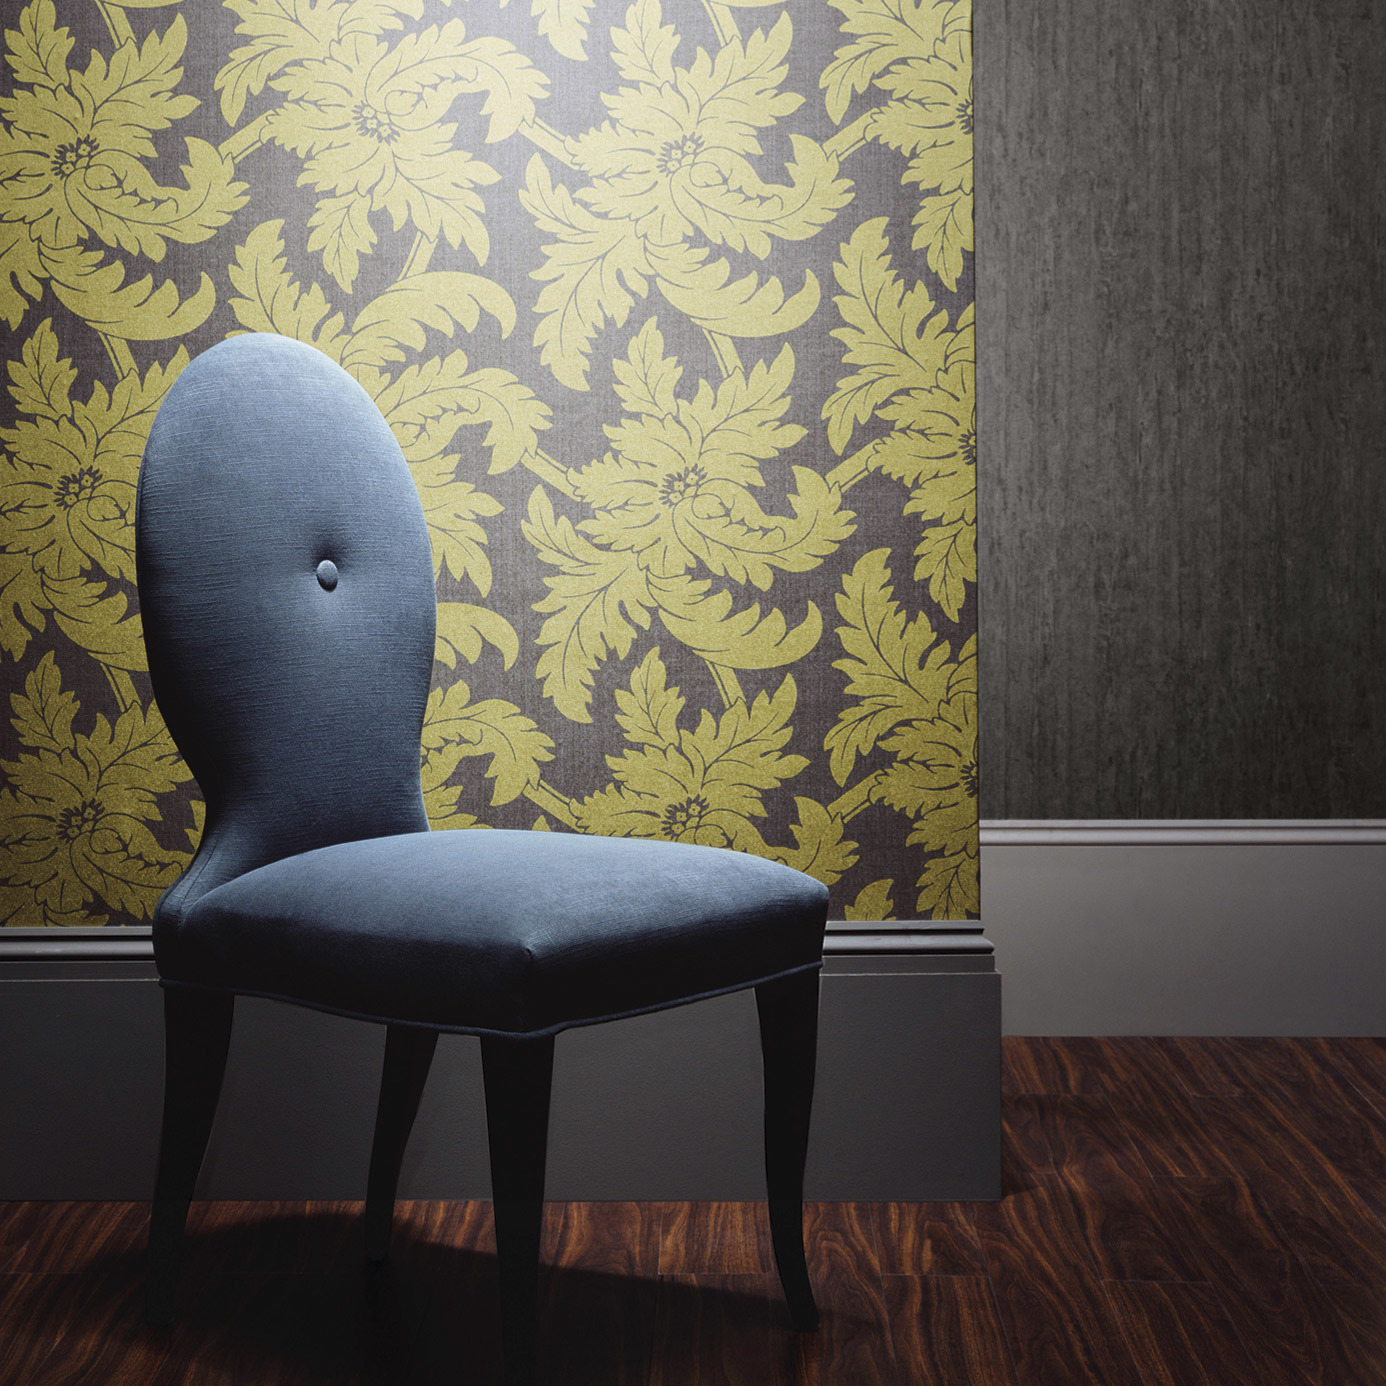 Watered Silk Ivory Wallpaper by ZOF